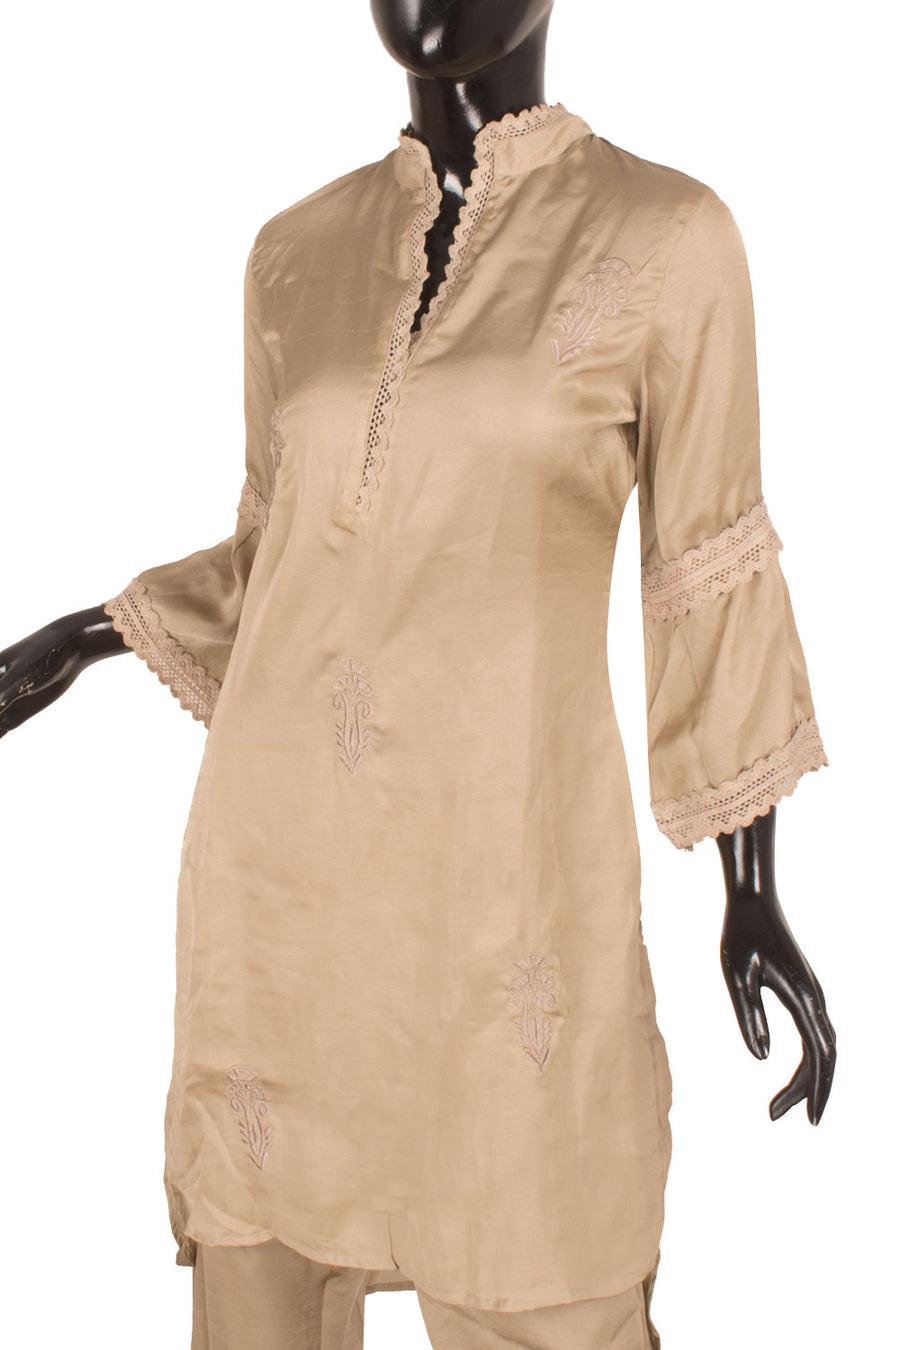 Handcrafted Silk Kurta Set with Floral Embroidery and Crochet Sleeves and Neck